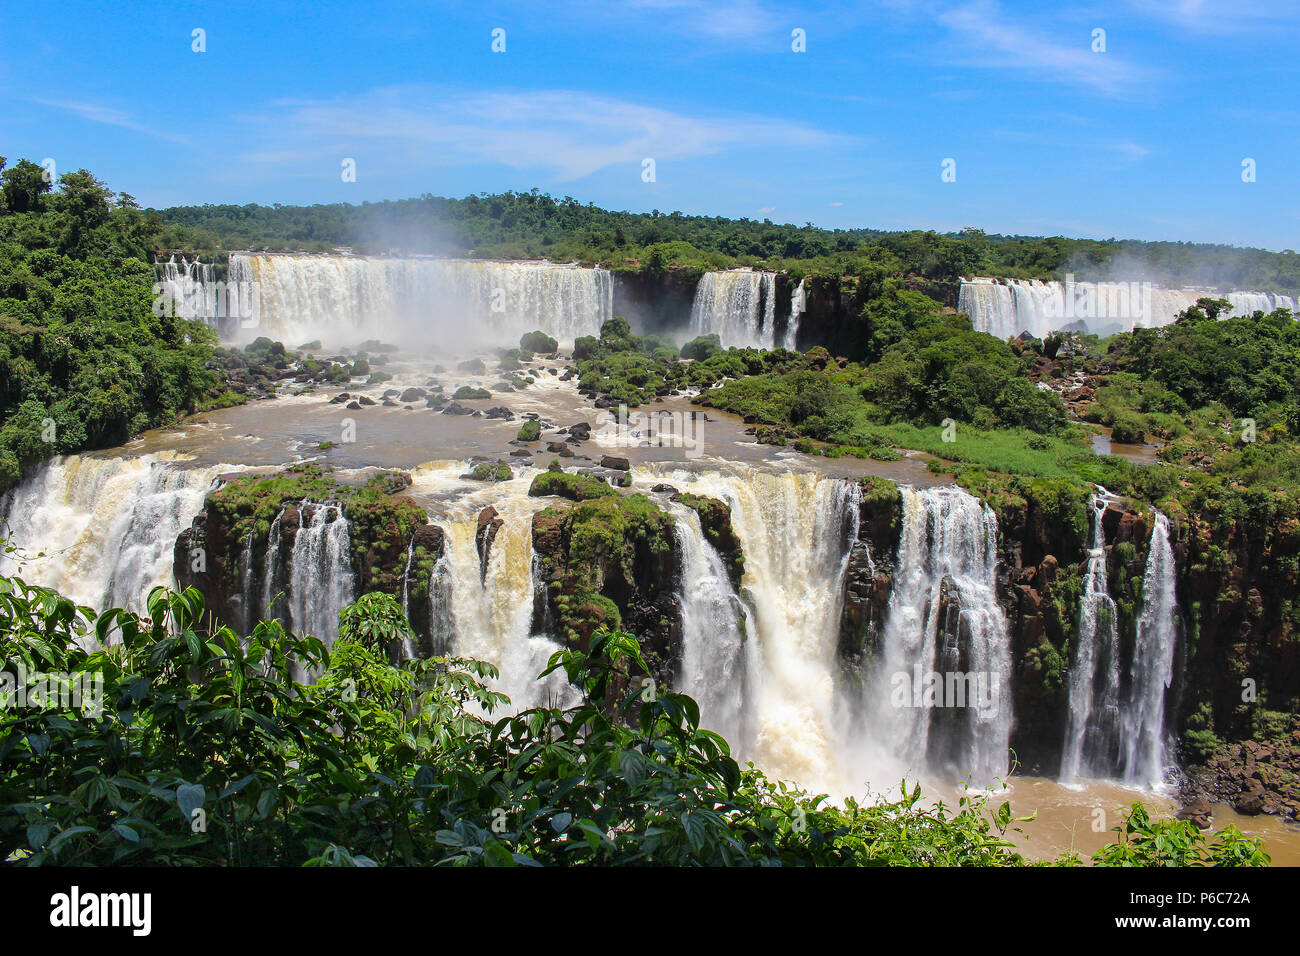 Iguazu Falls or Iguaçu Falls are waterfalls of the Iguazu River on the border of the Argentine province of Misiones and the Brazilian state of Parana, Stock Photo